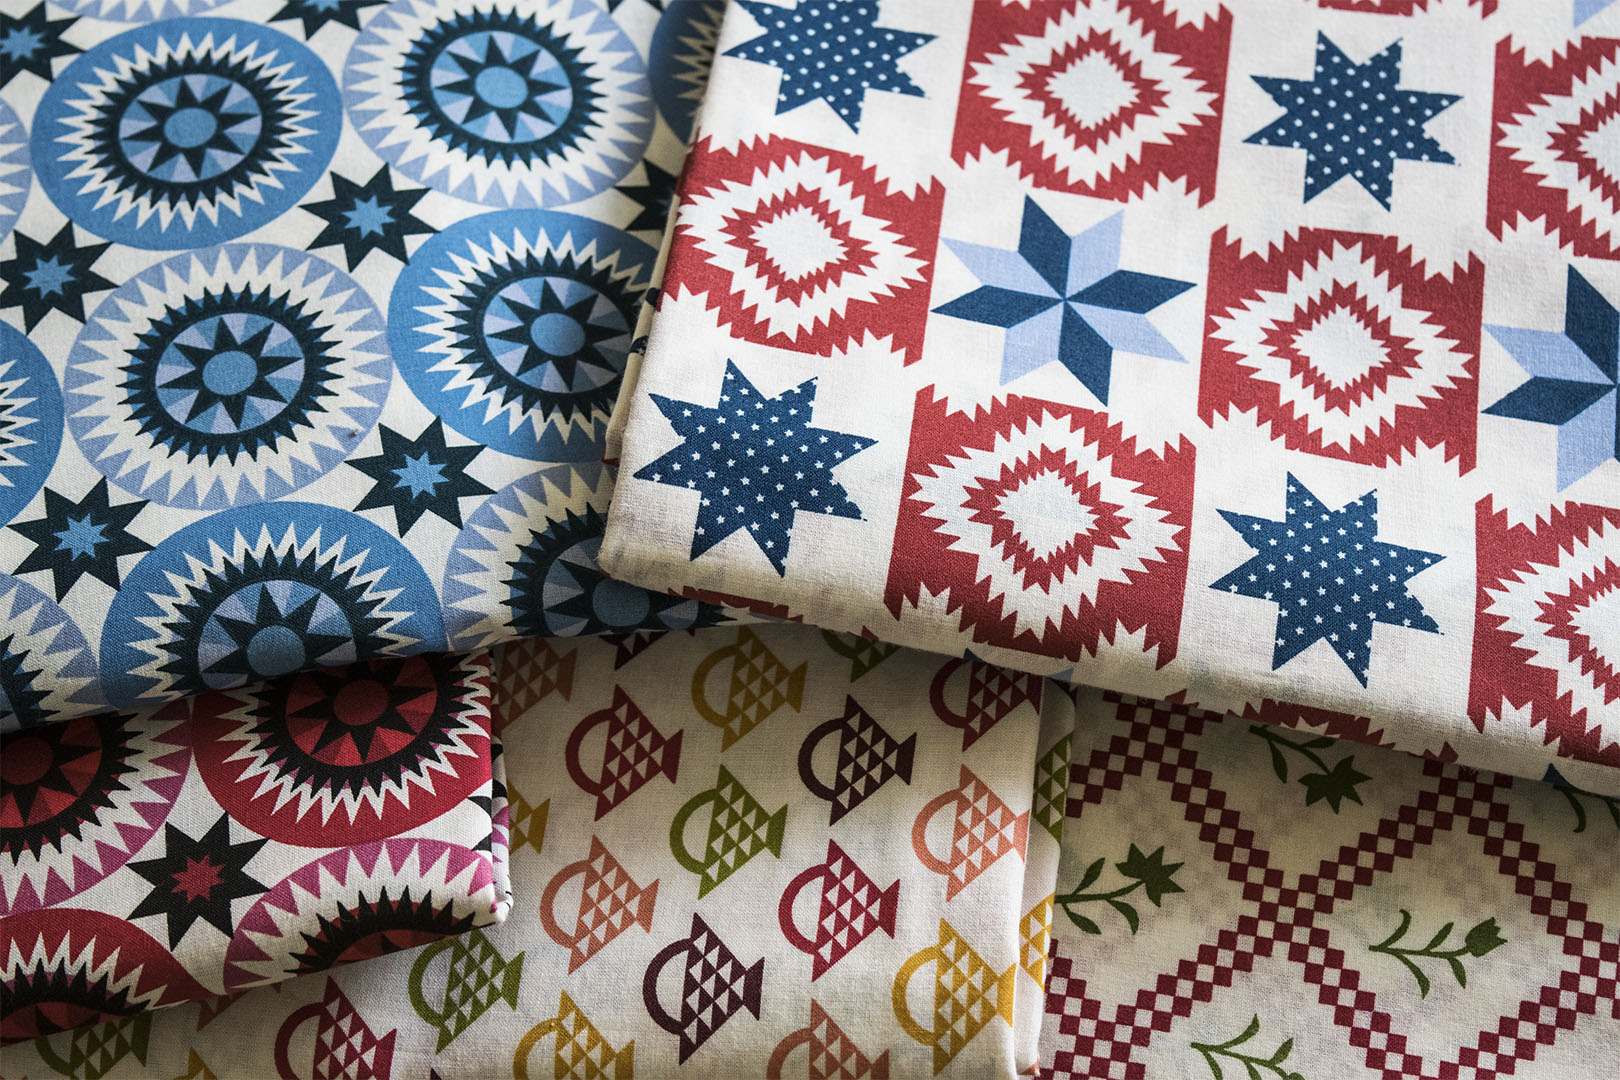   SPW 202: Traditional Quilts (108")  